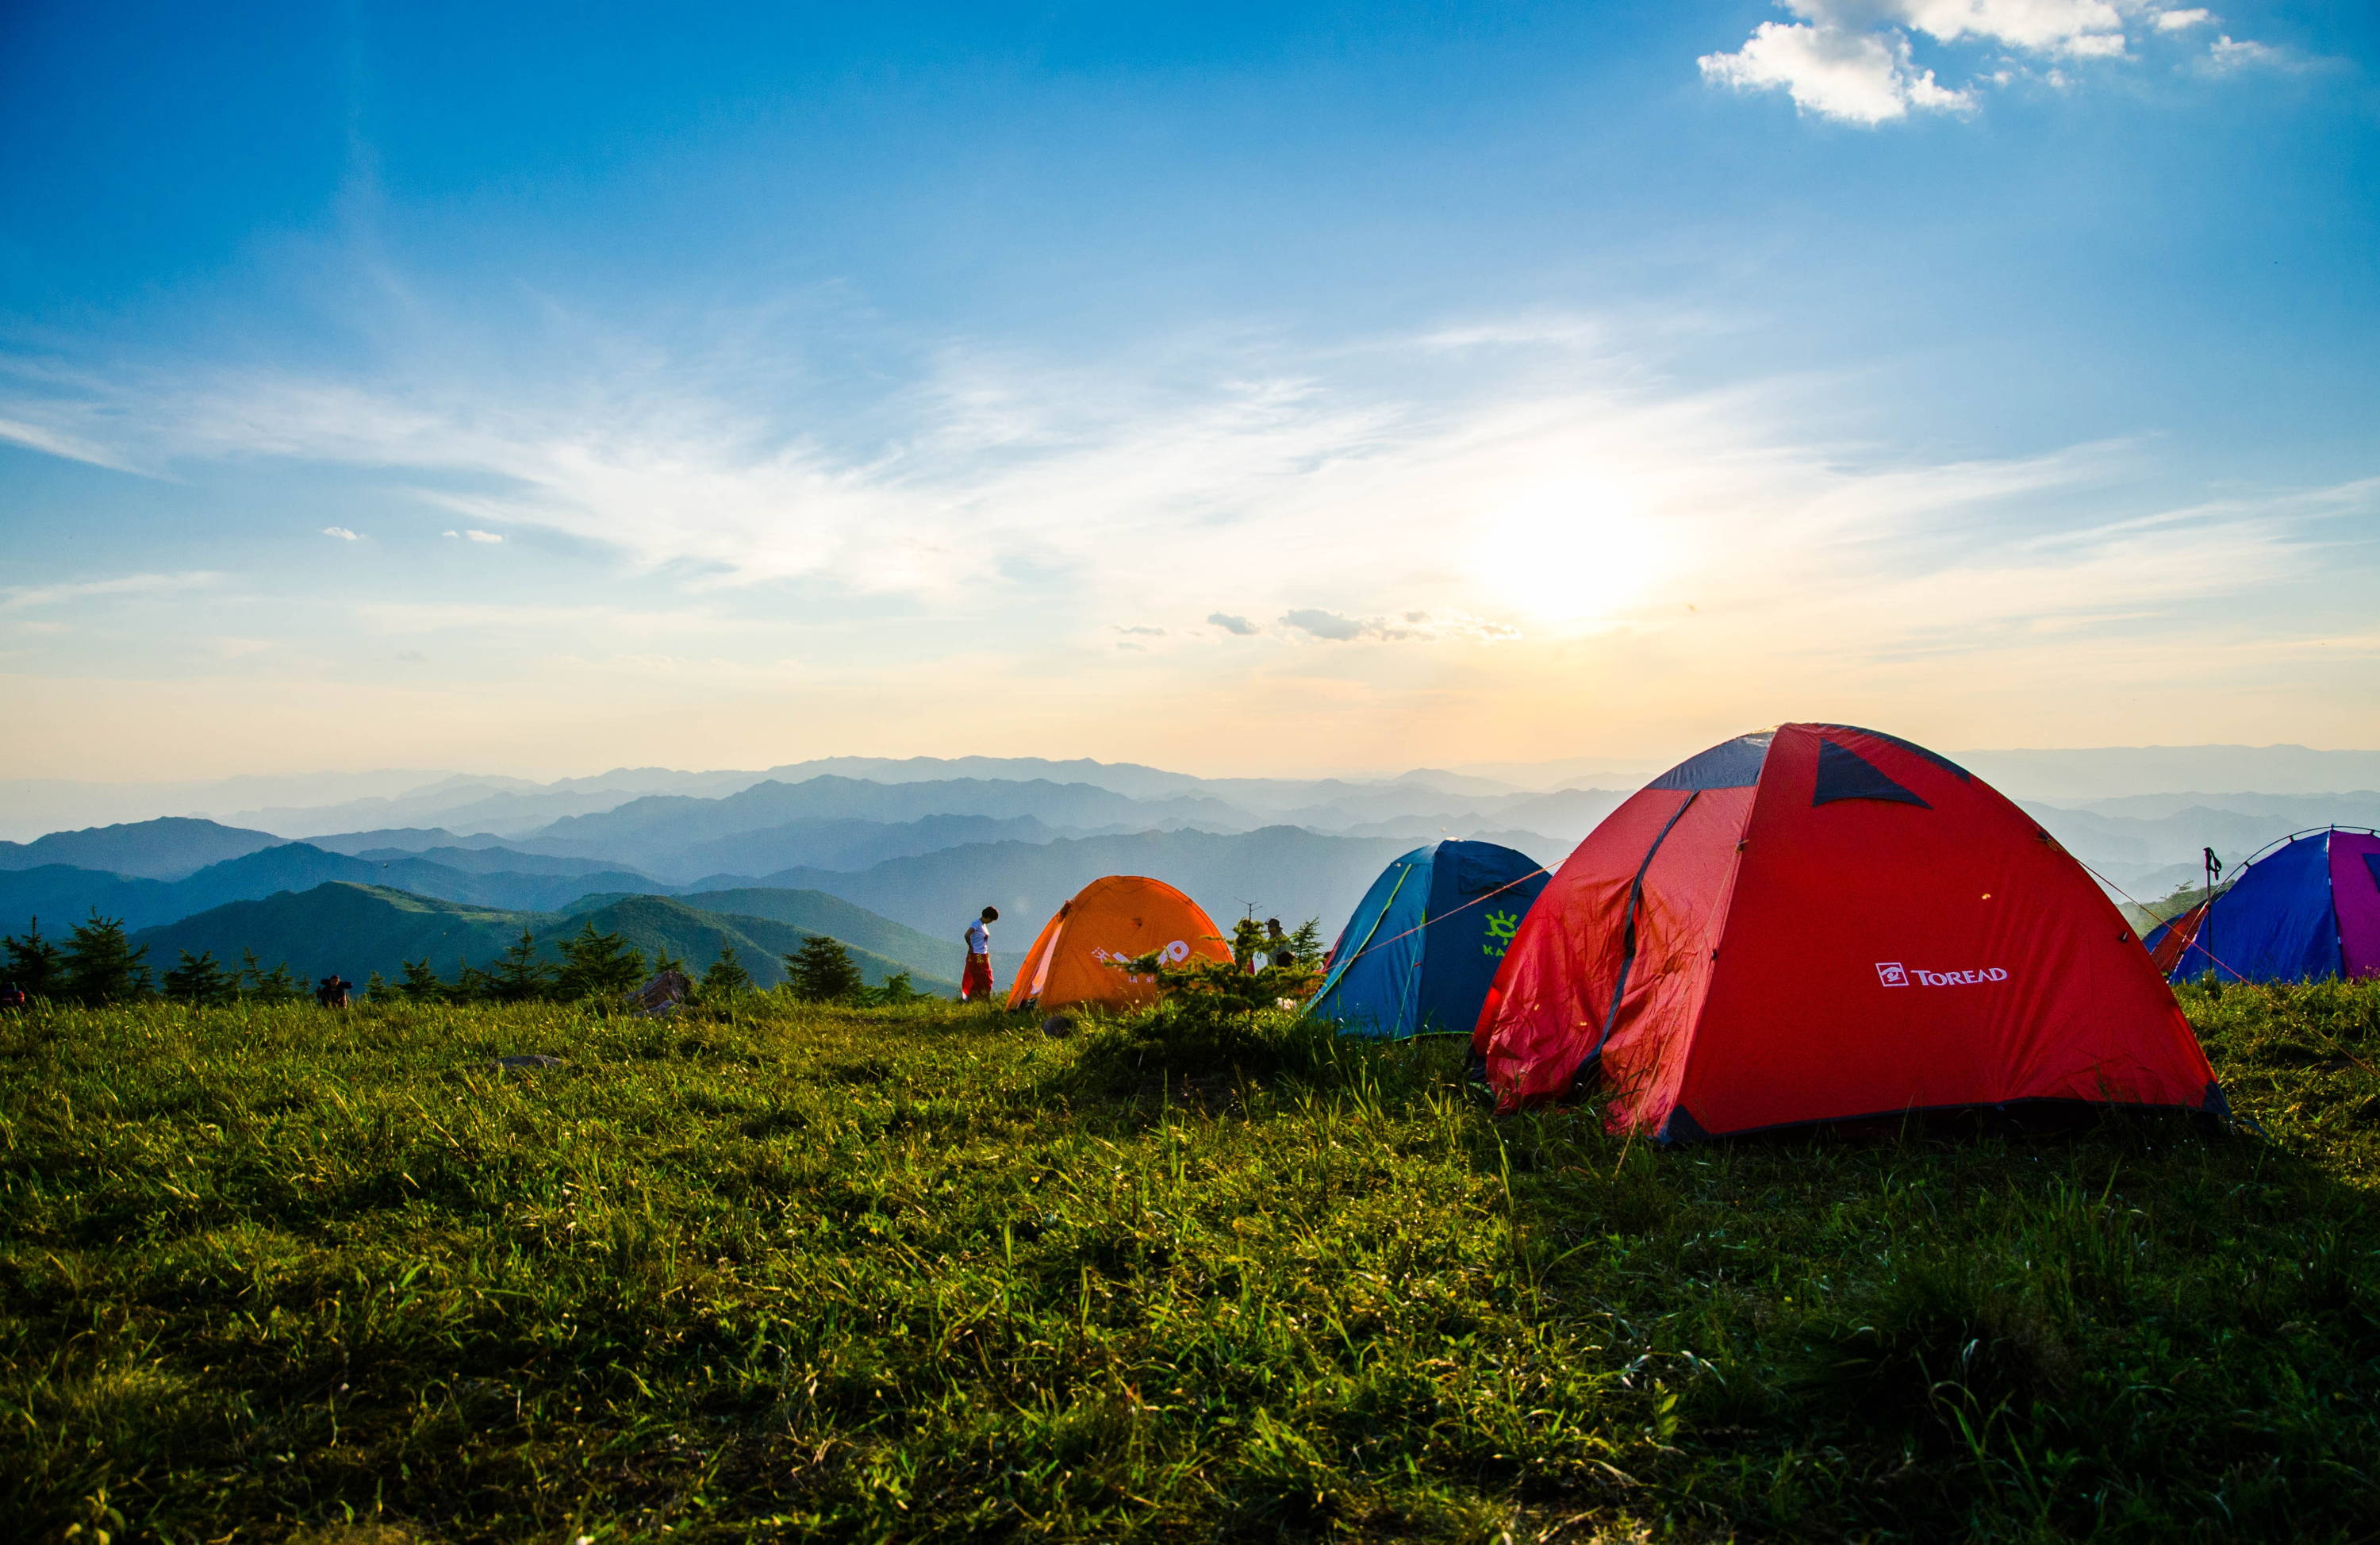 Enjoy environment-friendly camp trips and receive sustainable camping tips this summer